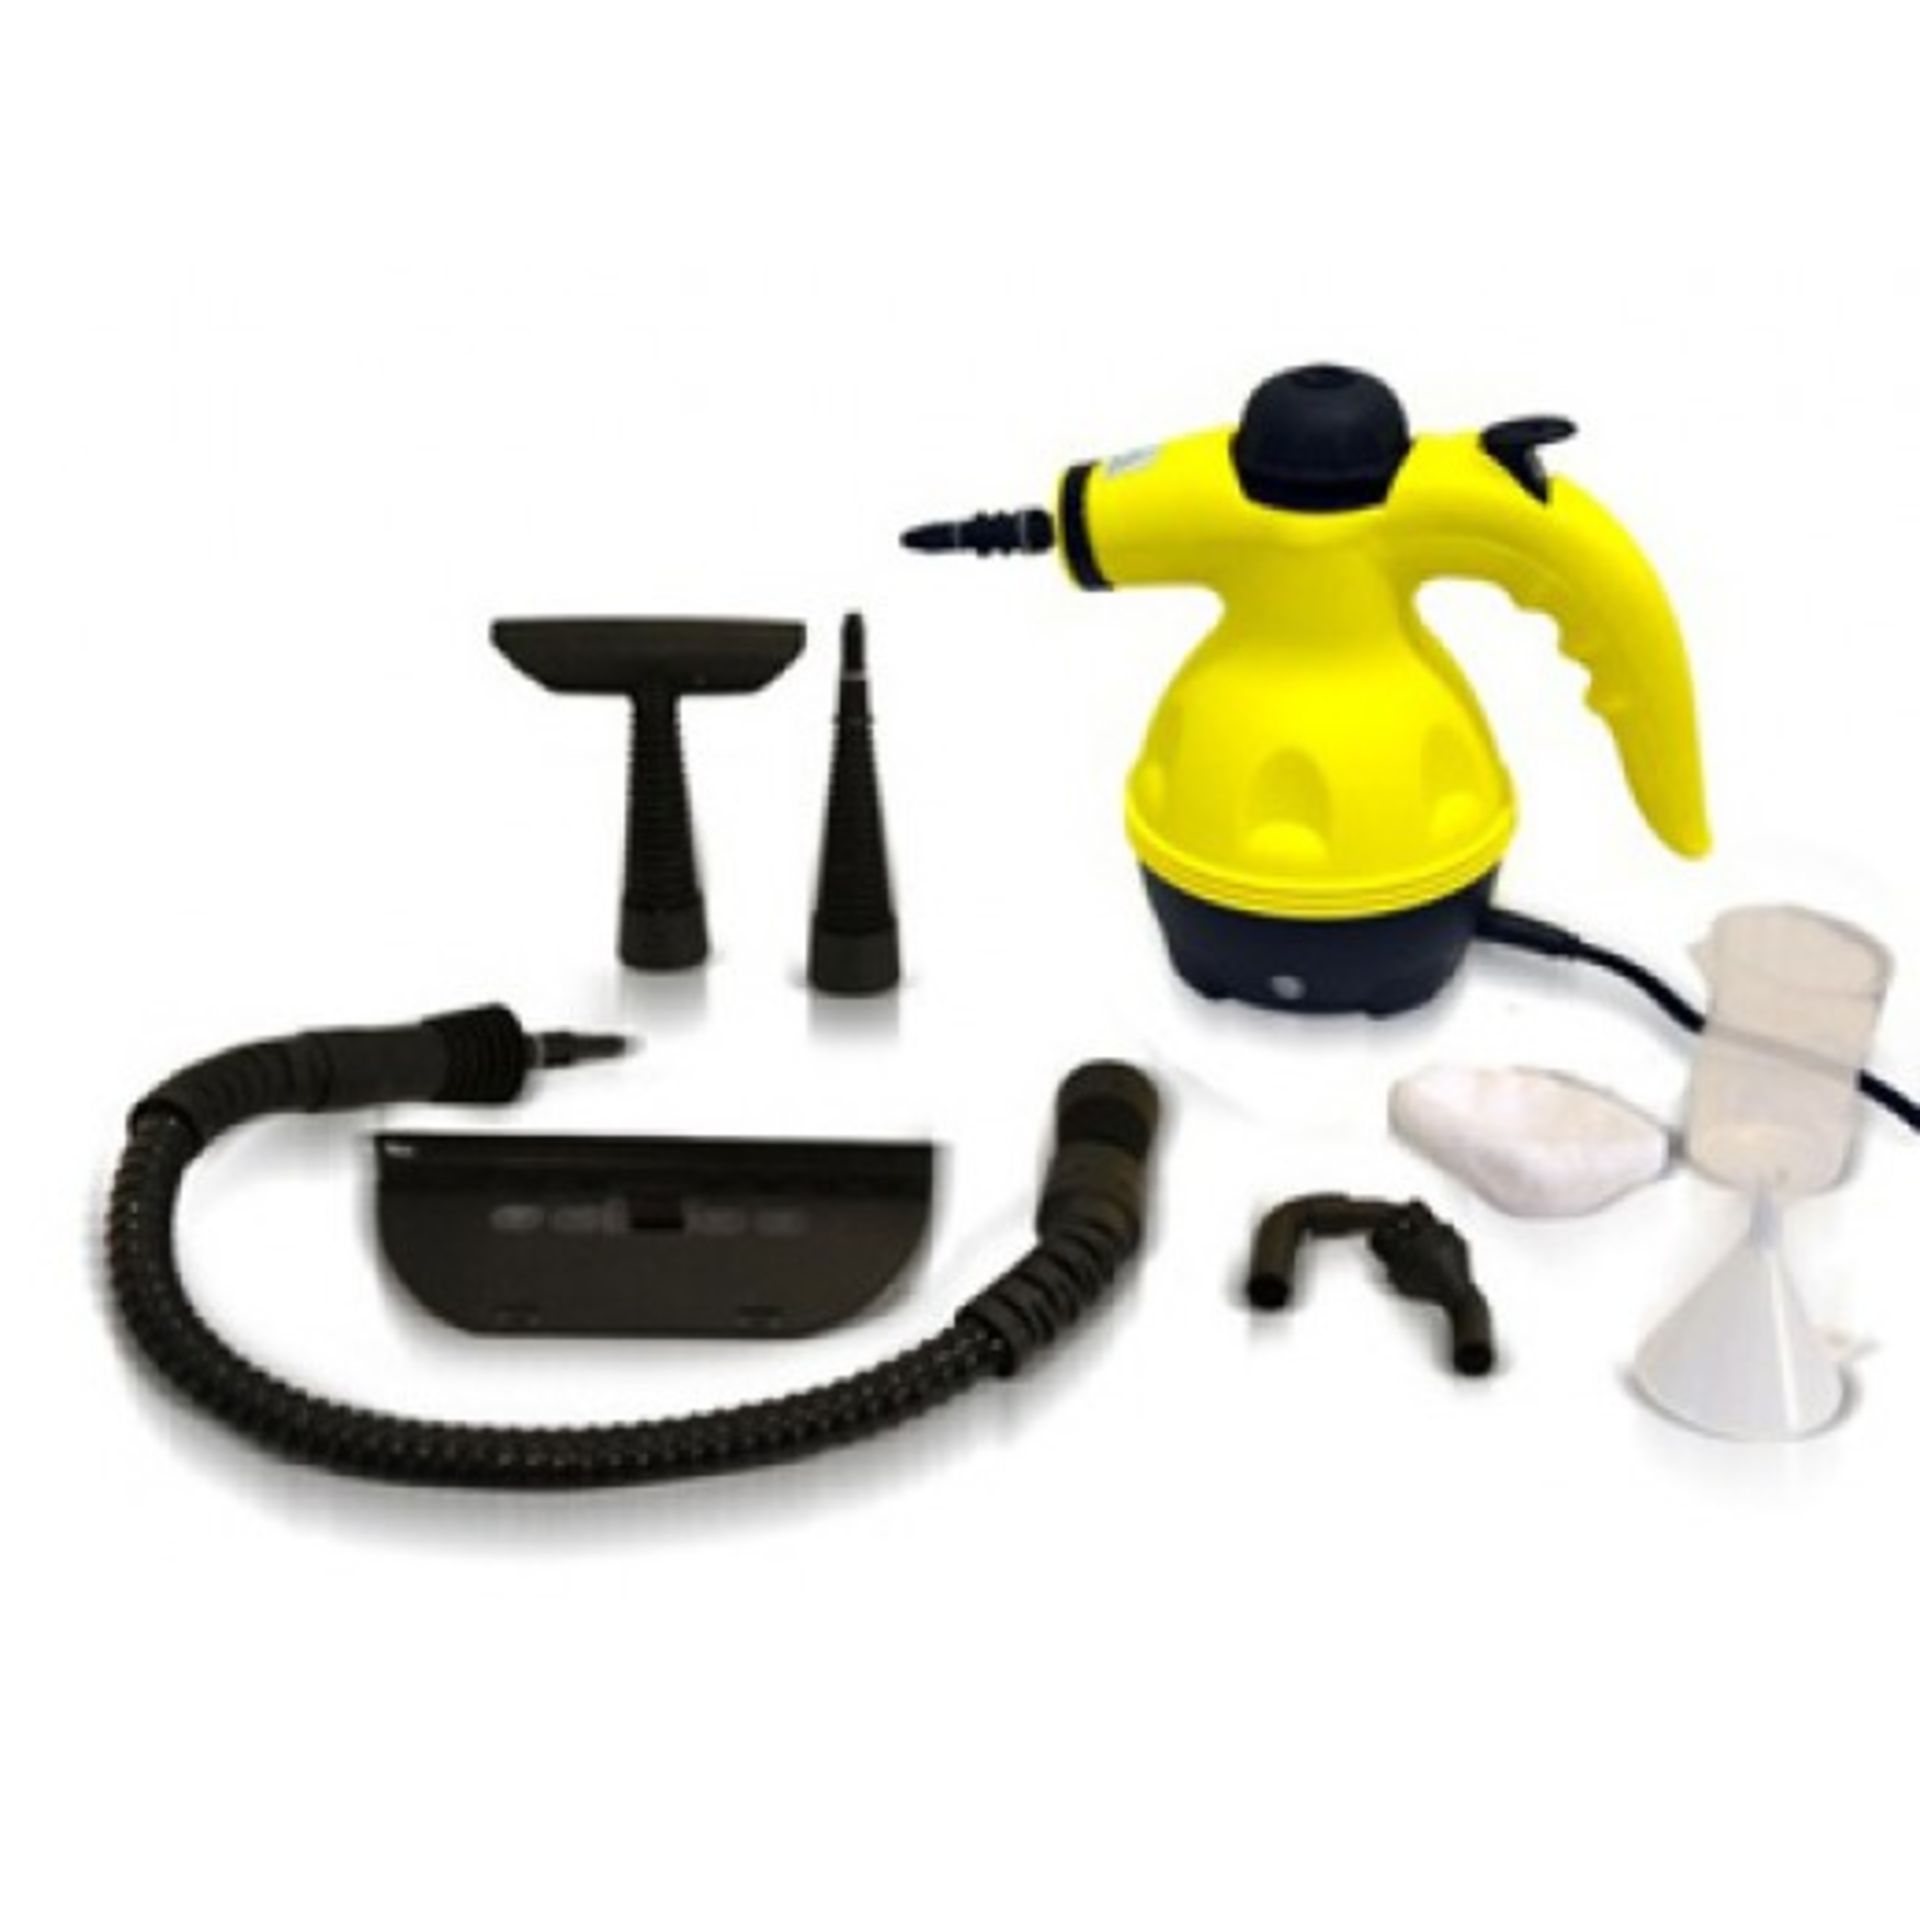 V Brand New 900-1050w Steam Cleaner-Accessories-Steam Hose-Window Cleaning Tool-Direct Jet Nozzle-